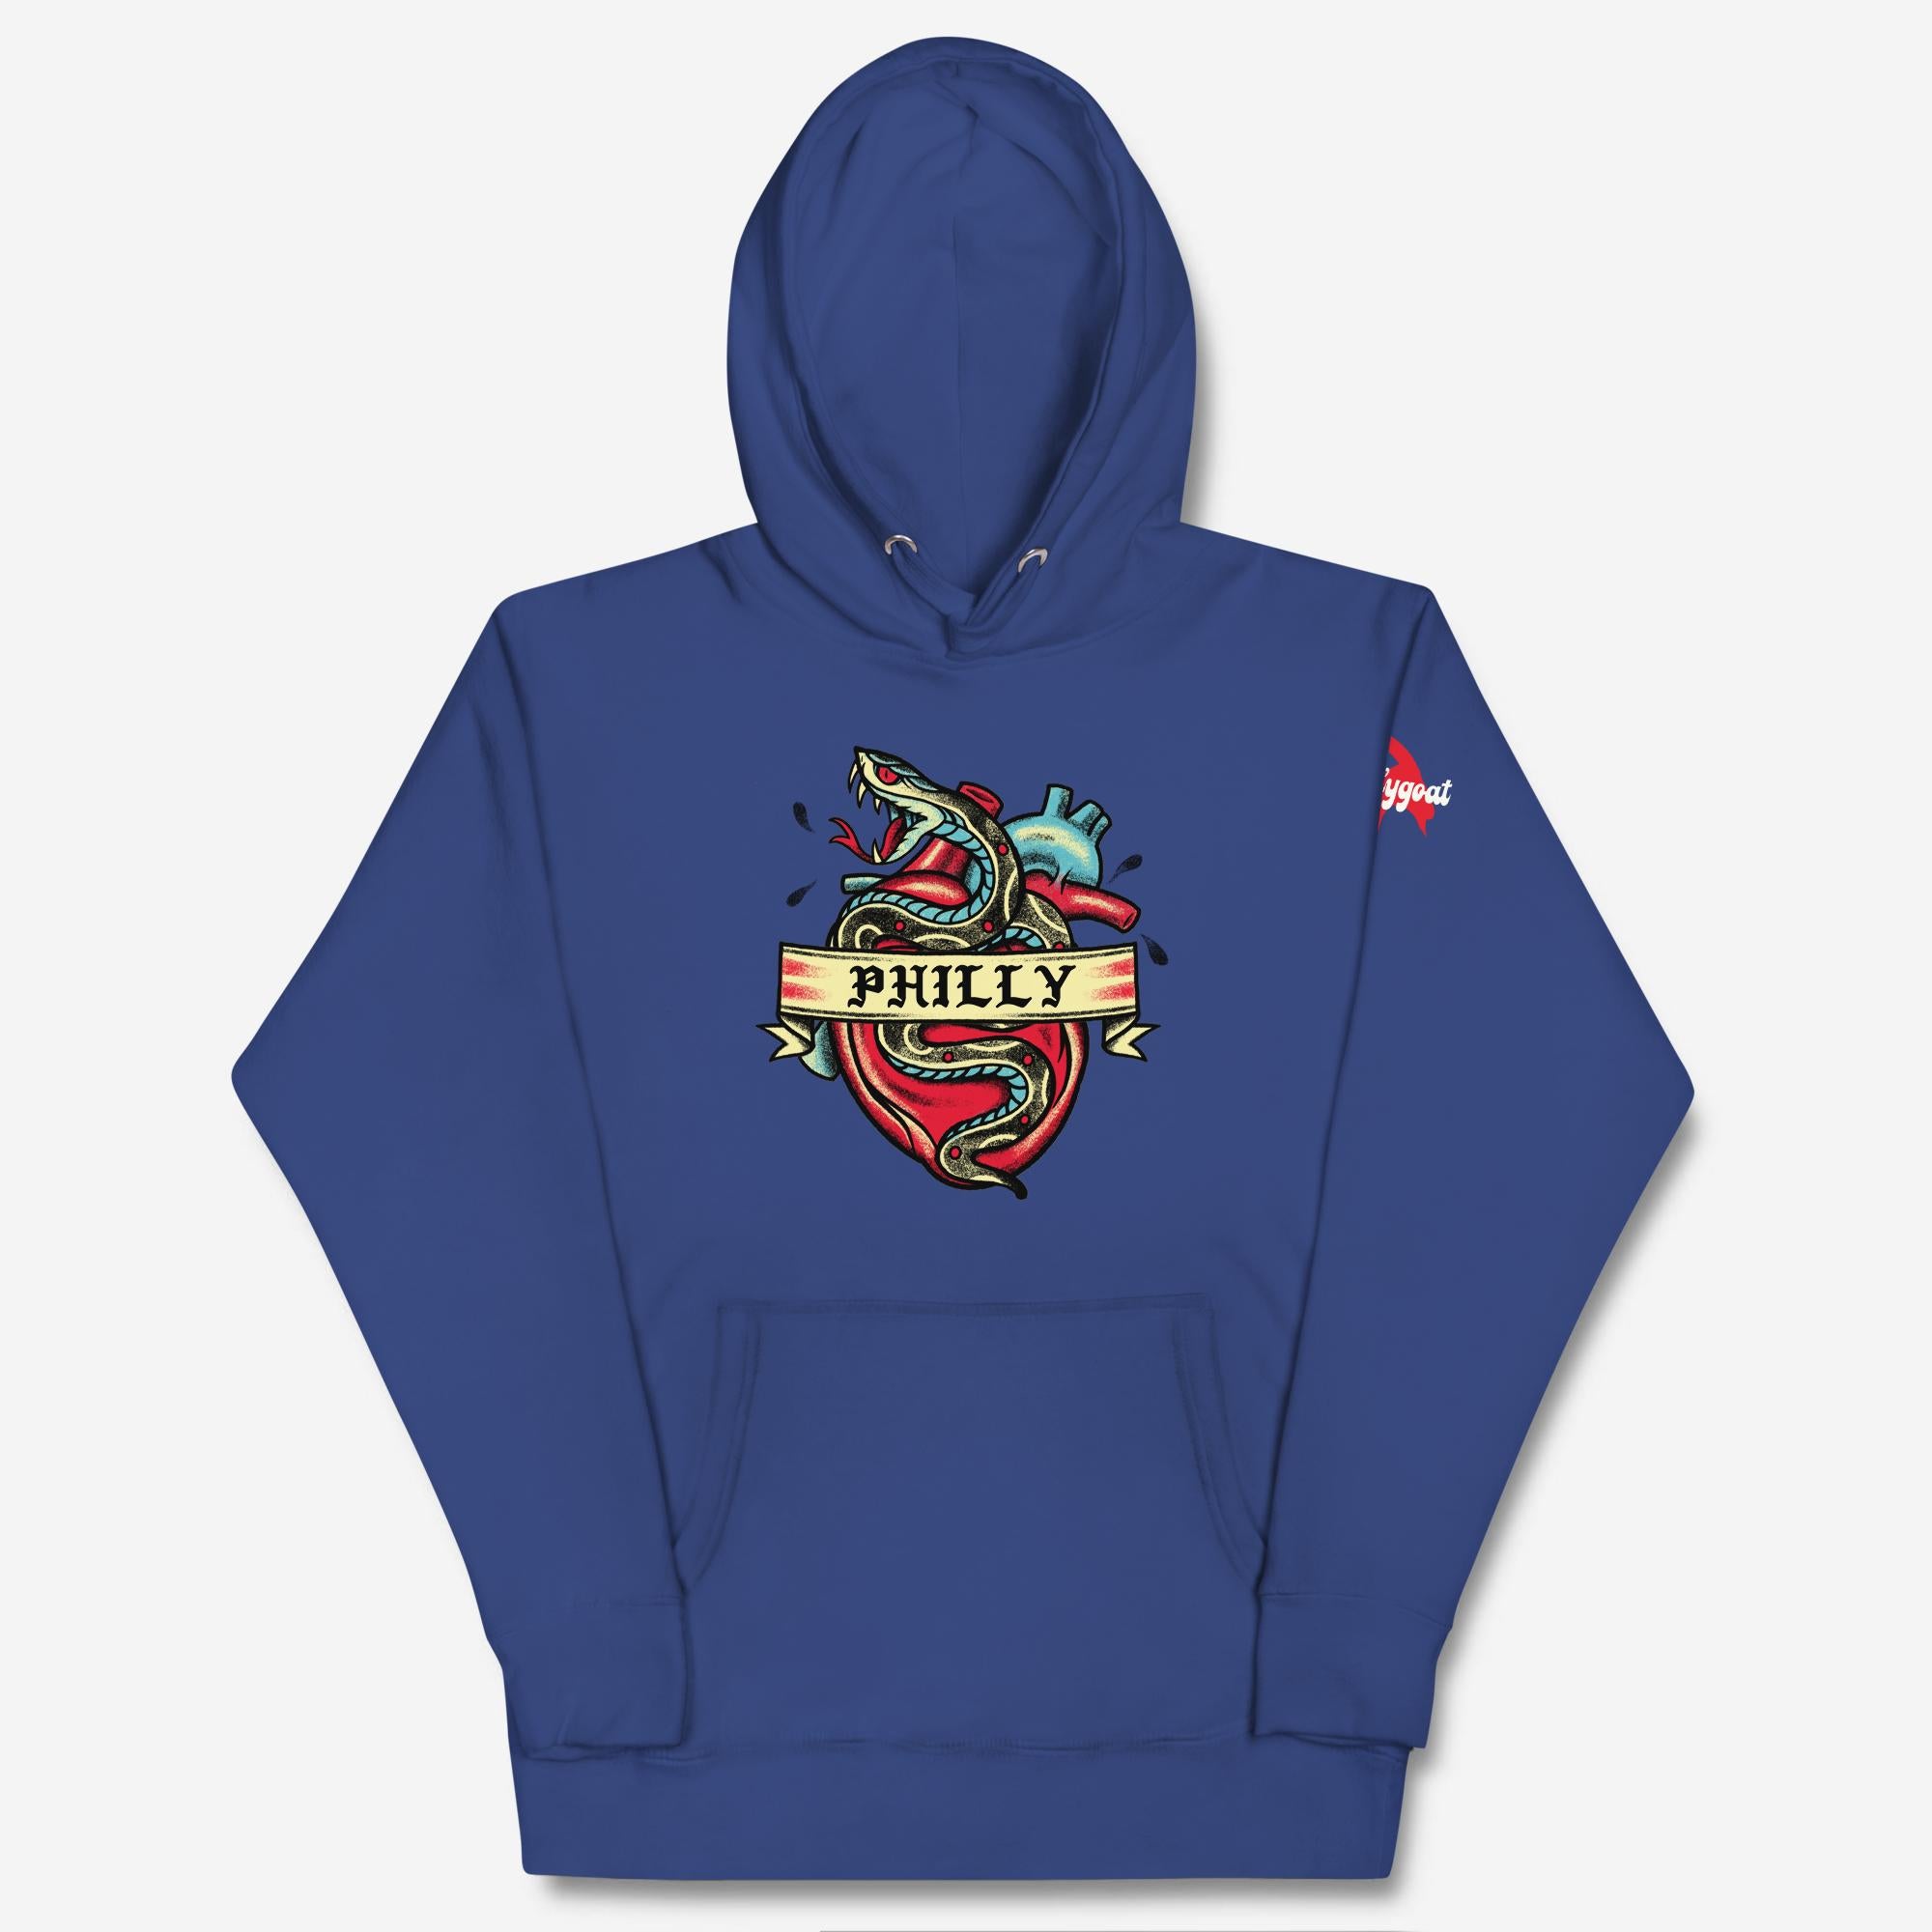 "Philly Snake Tattoo" Hoodie